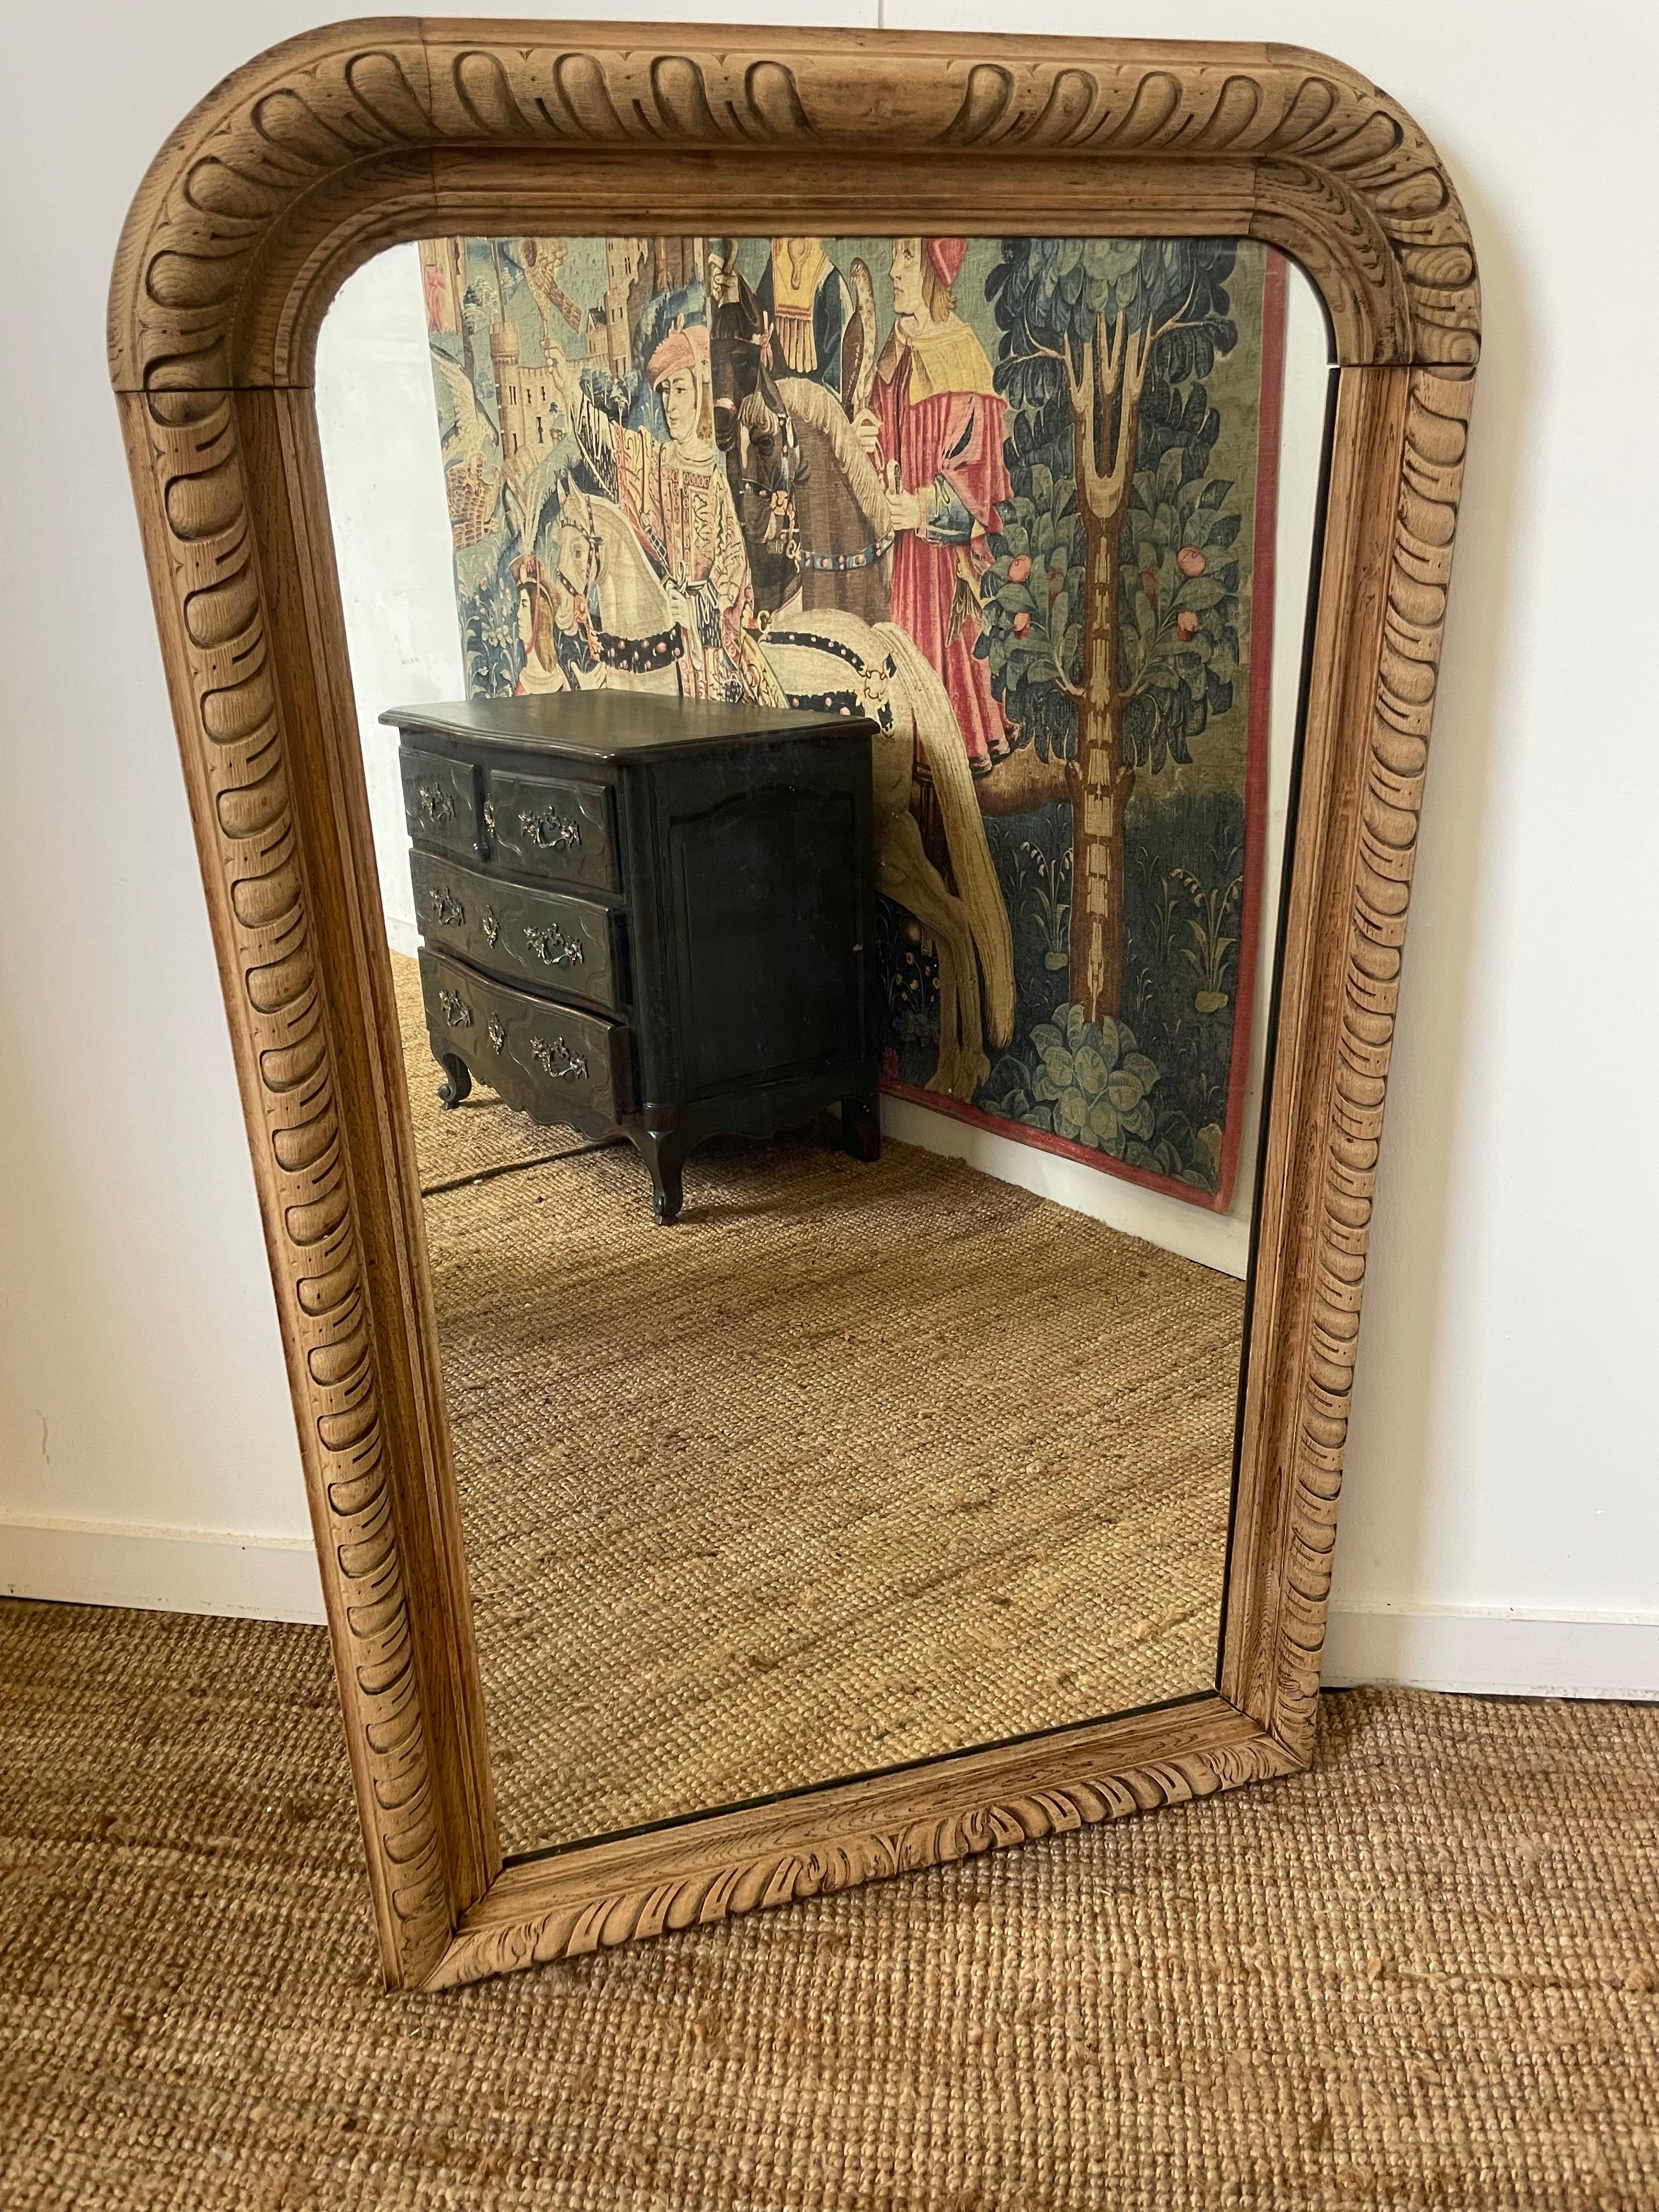 Very decorative 19th century scrubbed oak mirror
French circa 1870’s with original mirror and backboards
140x 86 cms